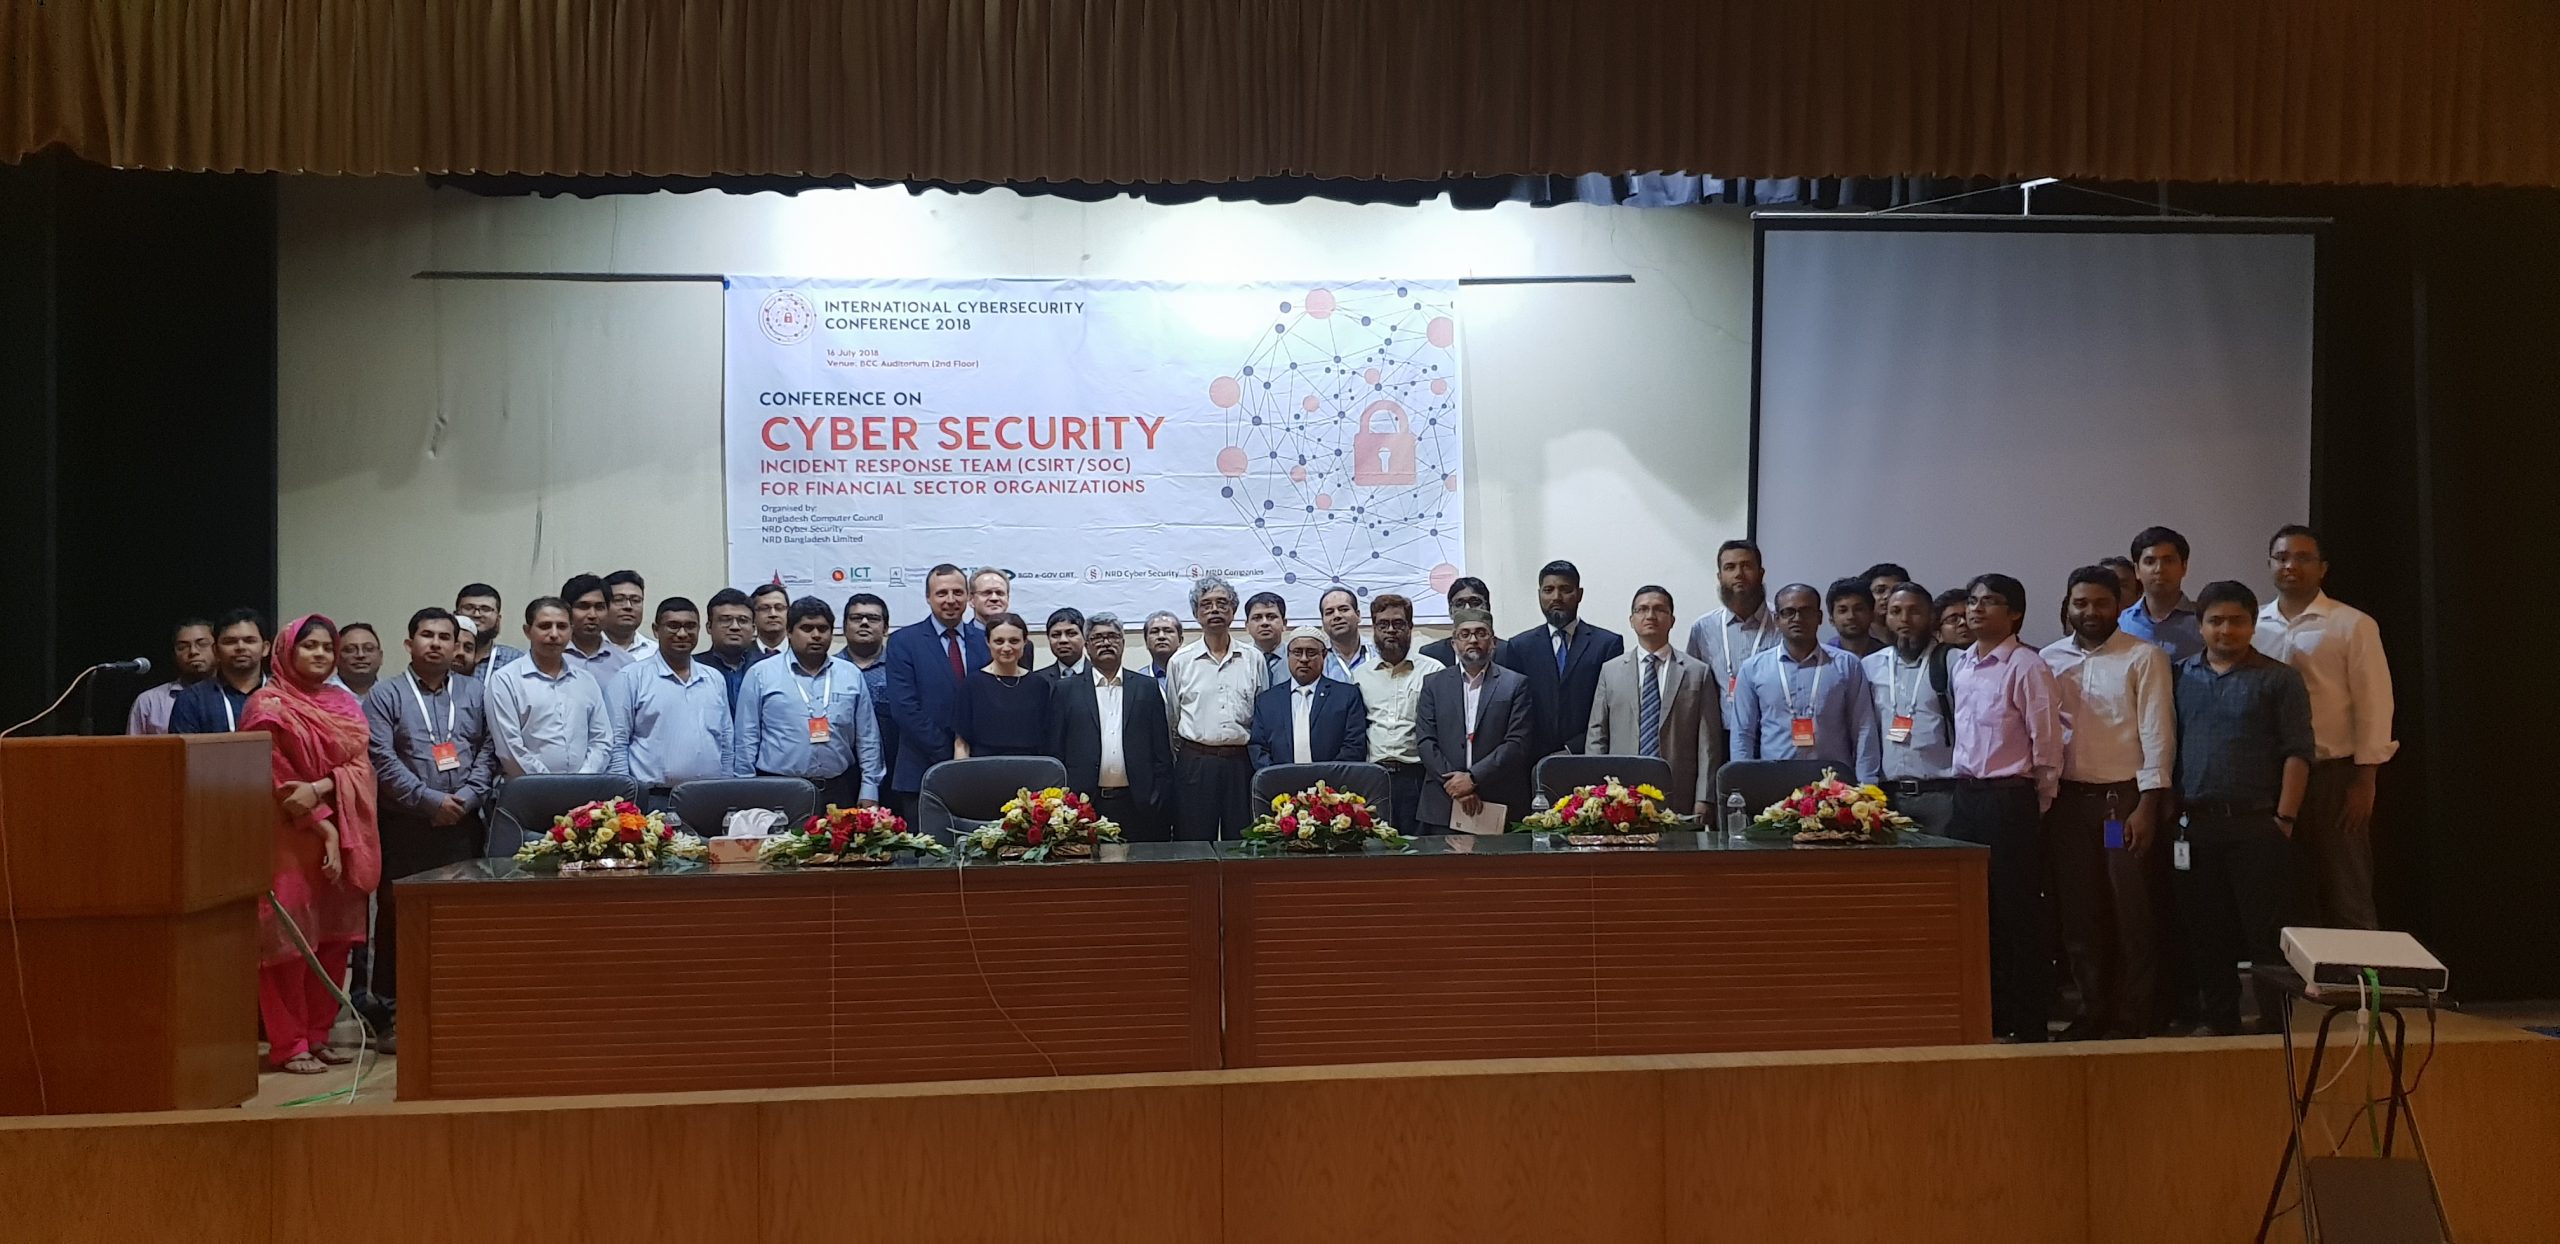 Conference on Cyber Security Incident Response Team (CSIRT/SOC) for Financial Sector Organization